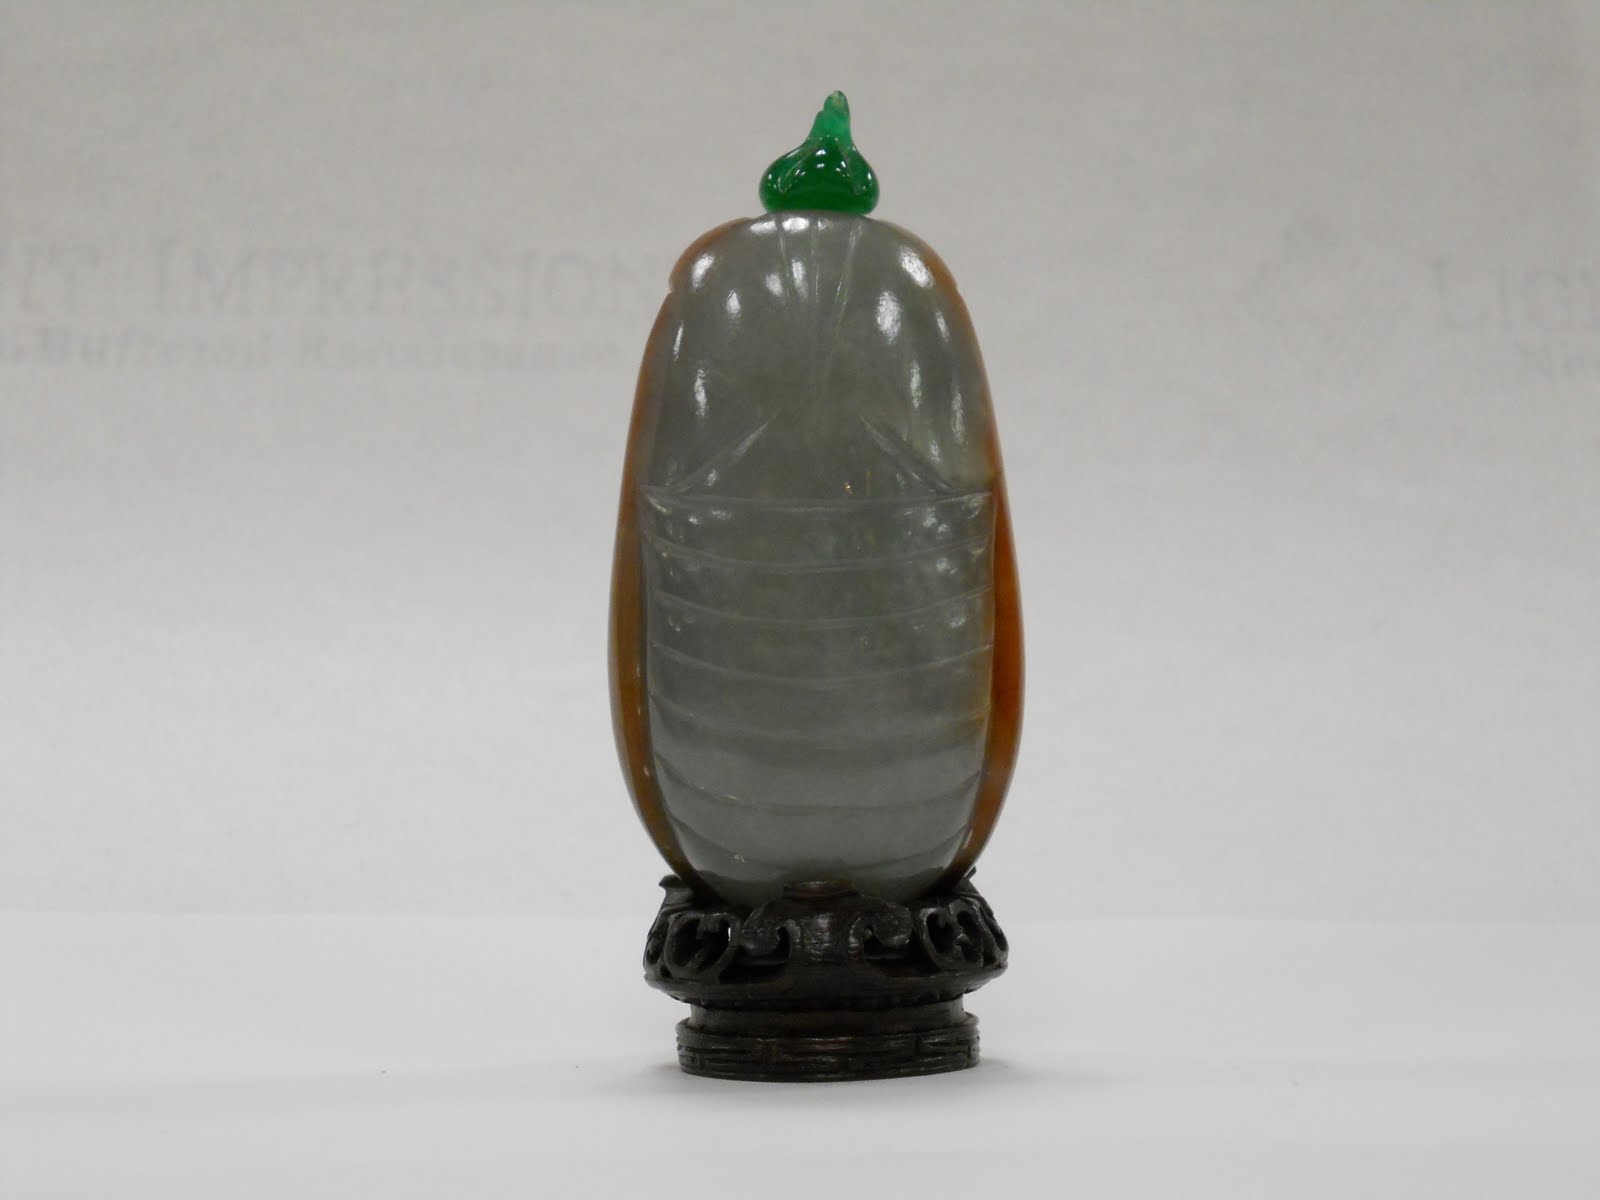 Chinese snuff bottle in the shape of a cicada